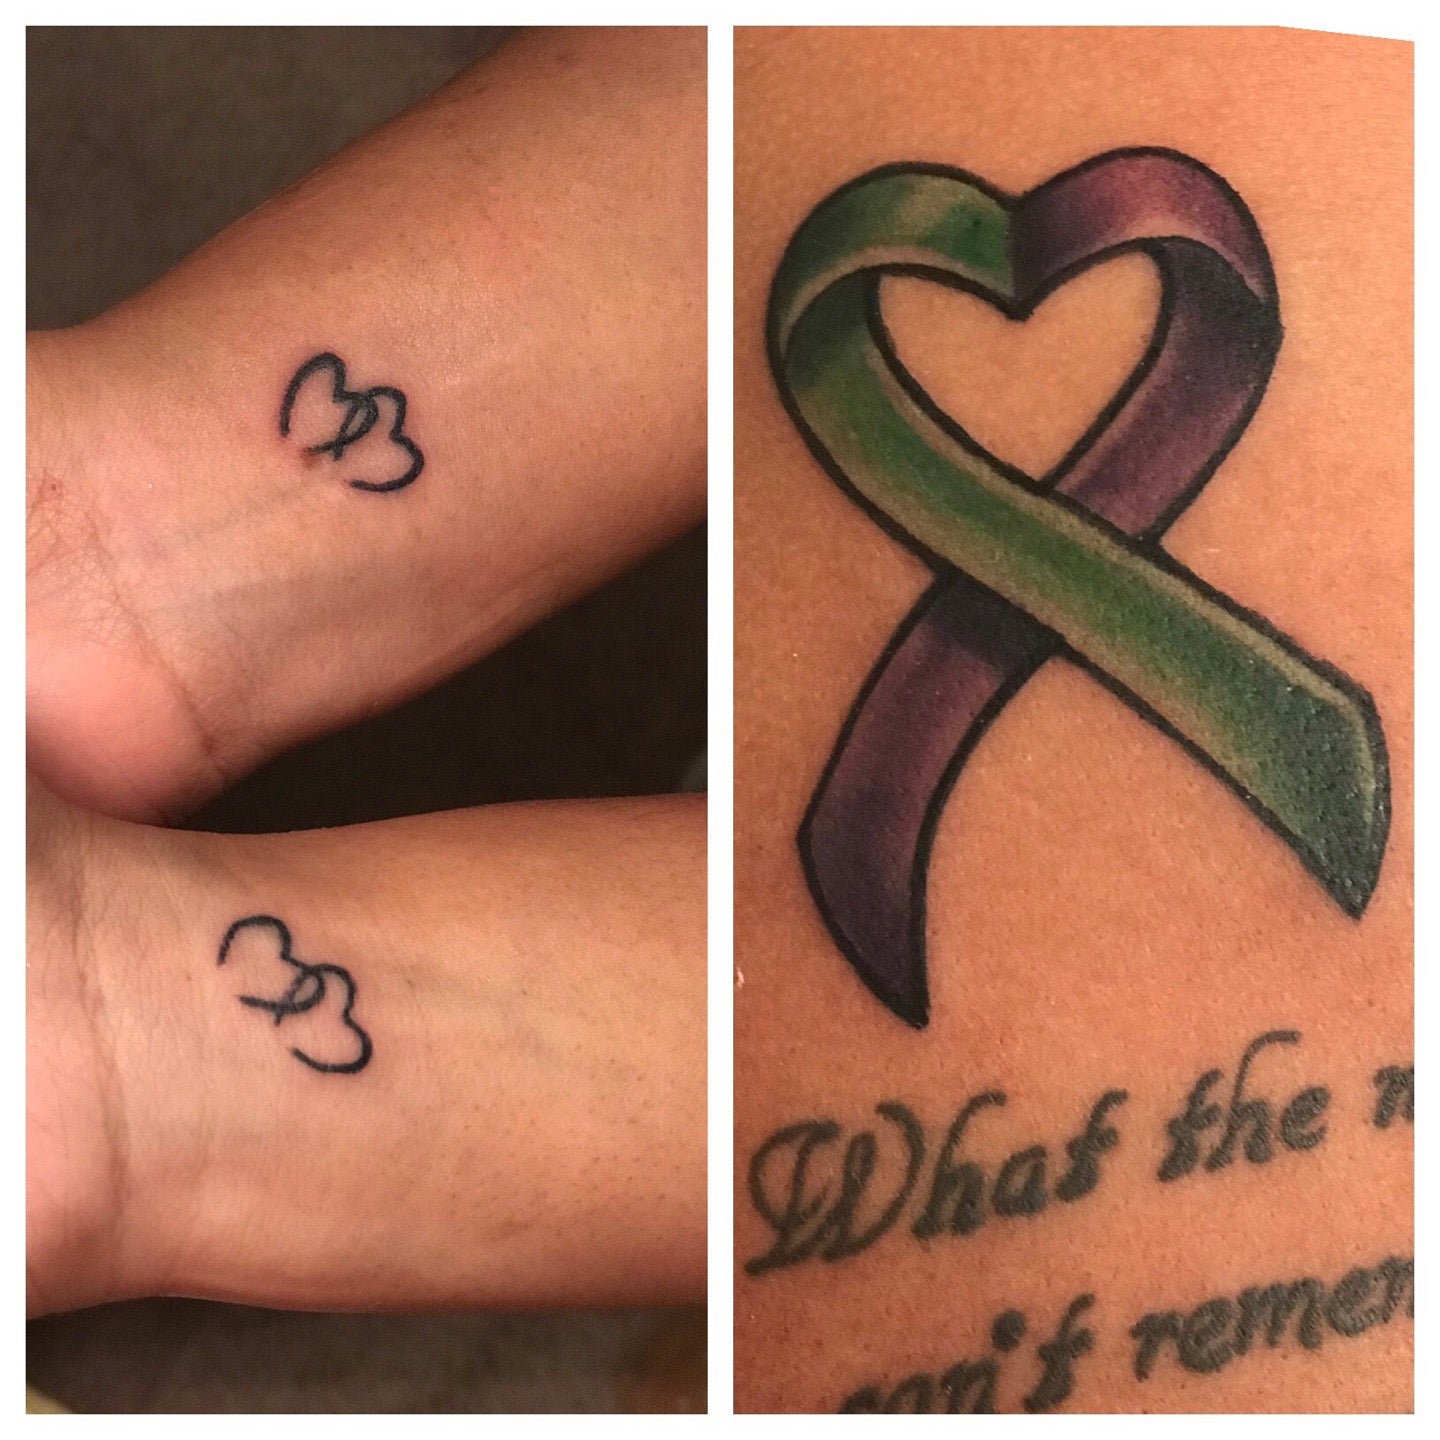 Is it safe for a person with epilepsy to get a tattoo